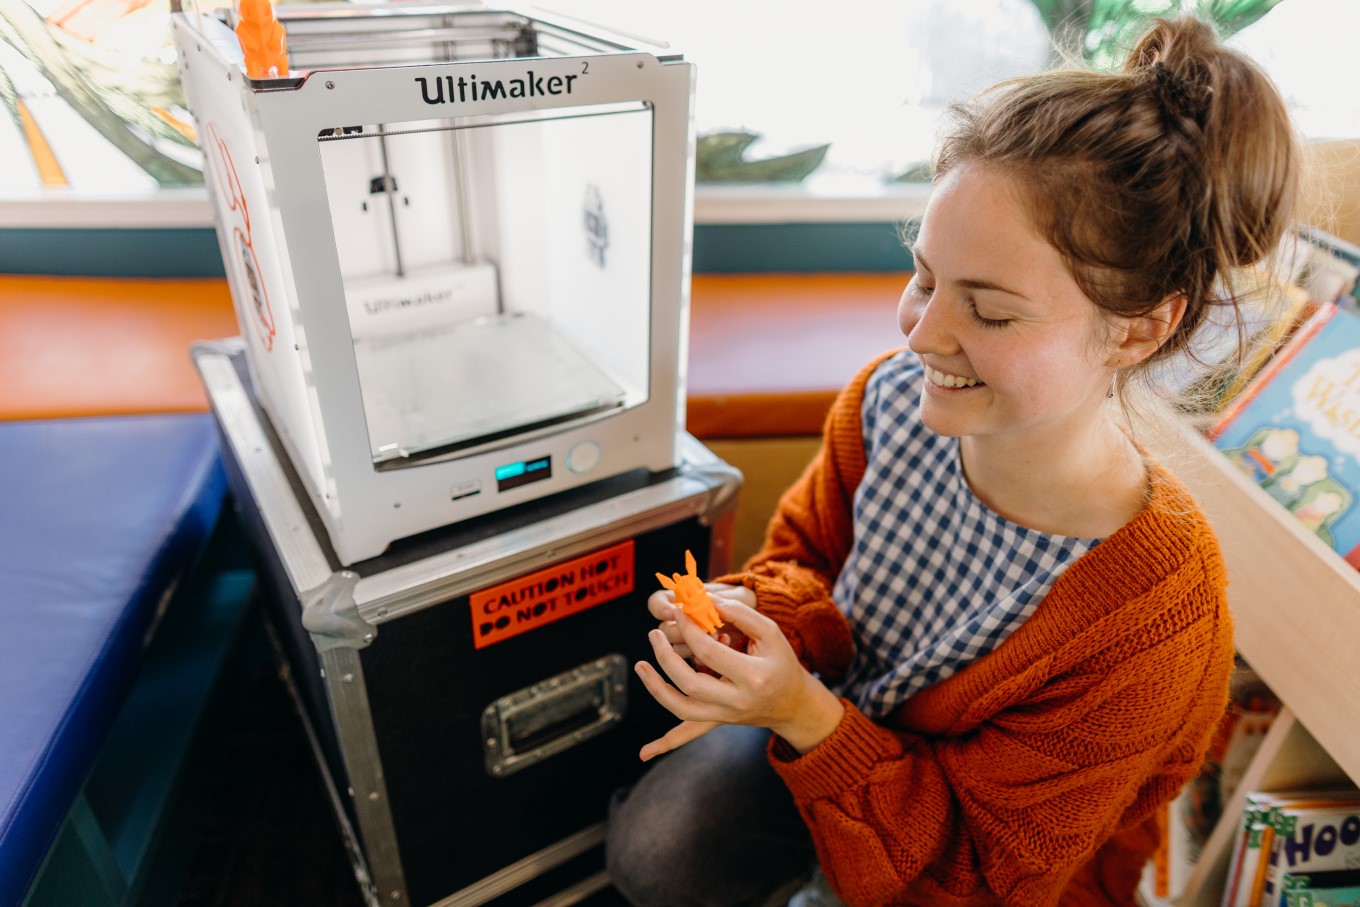 Get creative at one of the libraries’ Makerspaces. Sewing machines, 3D printers and video editing machines are all available to use for free or for a small fee.